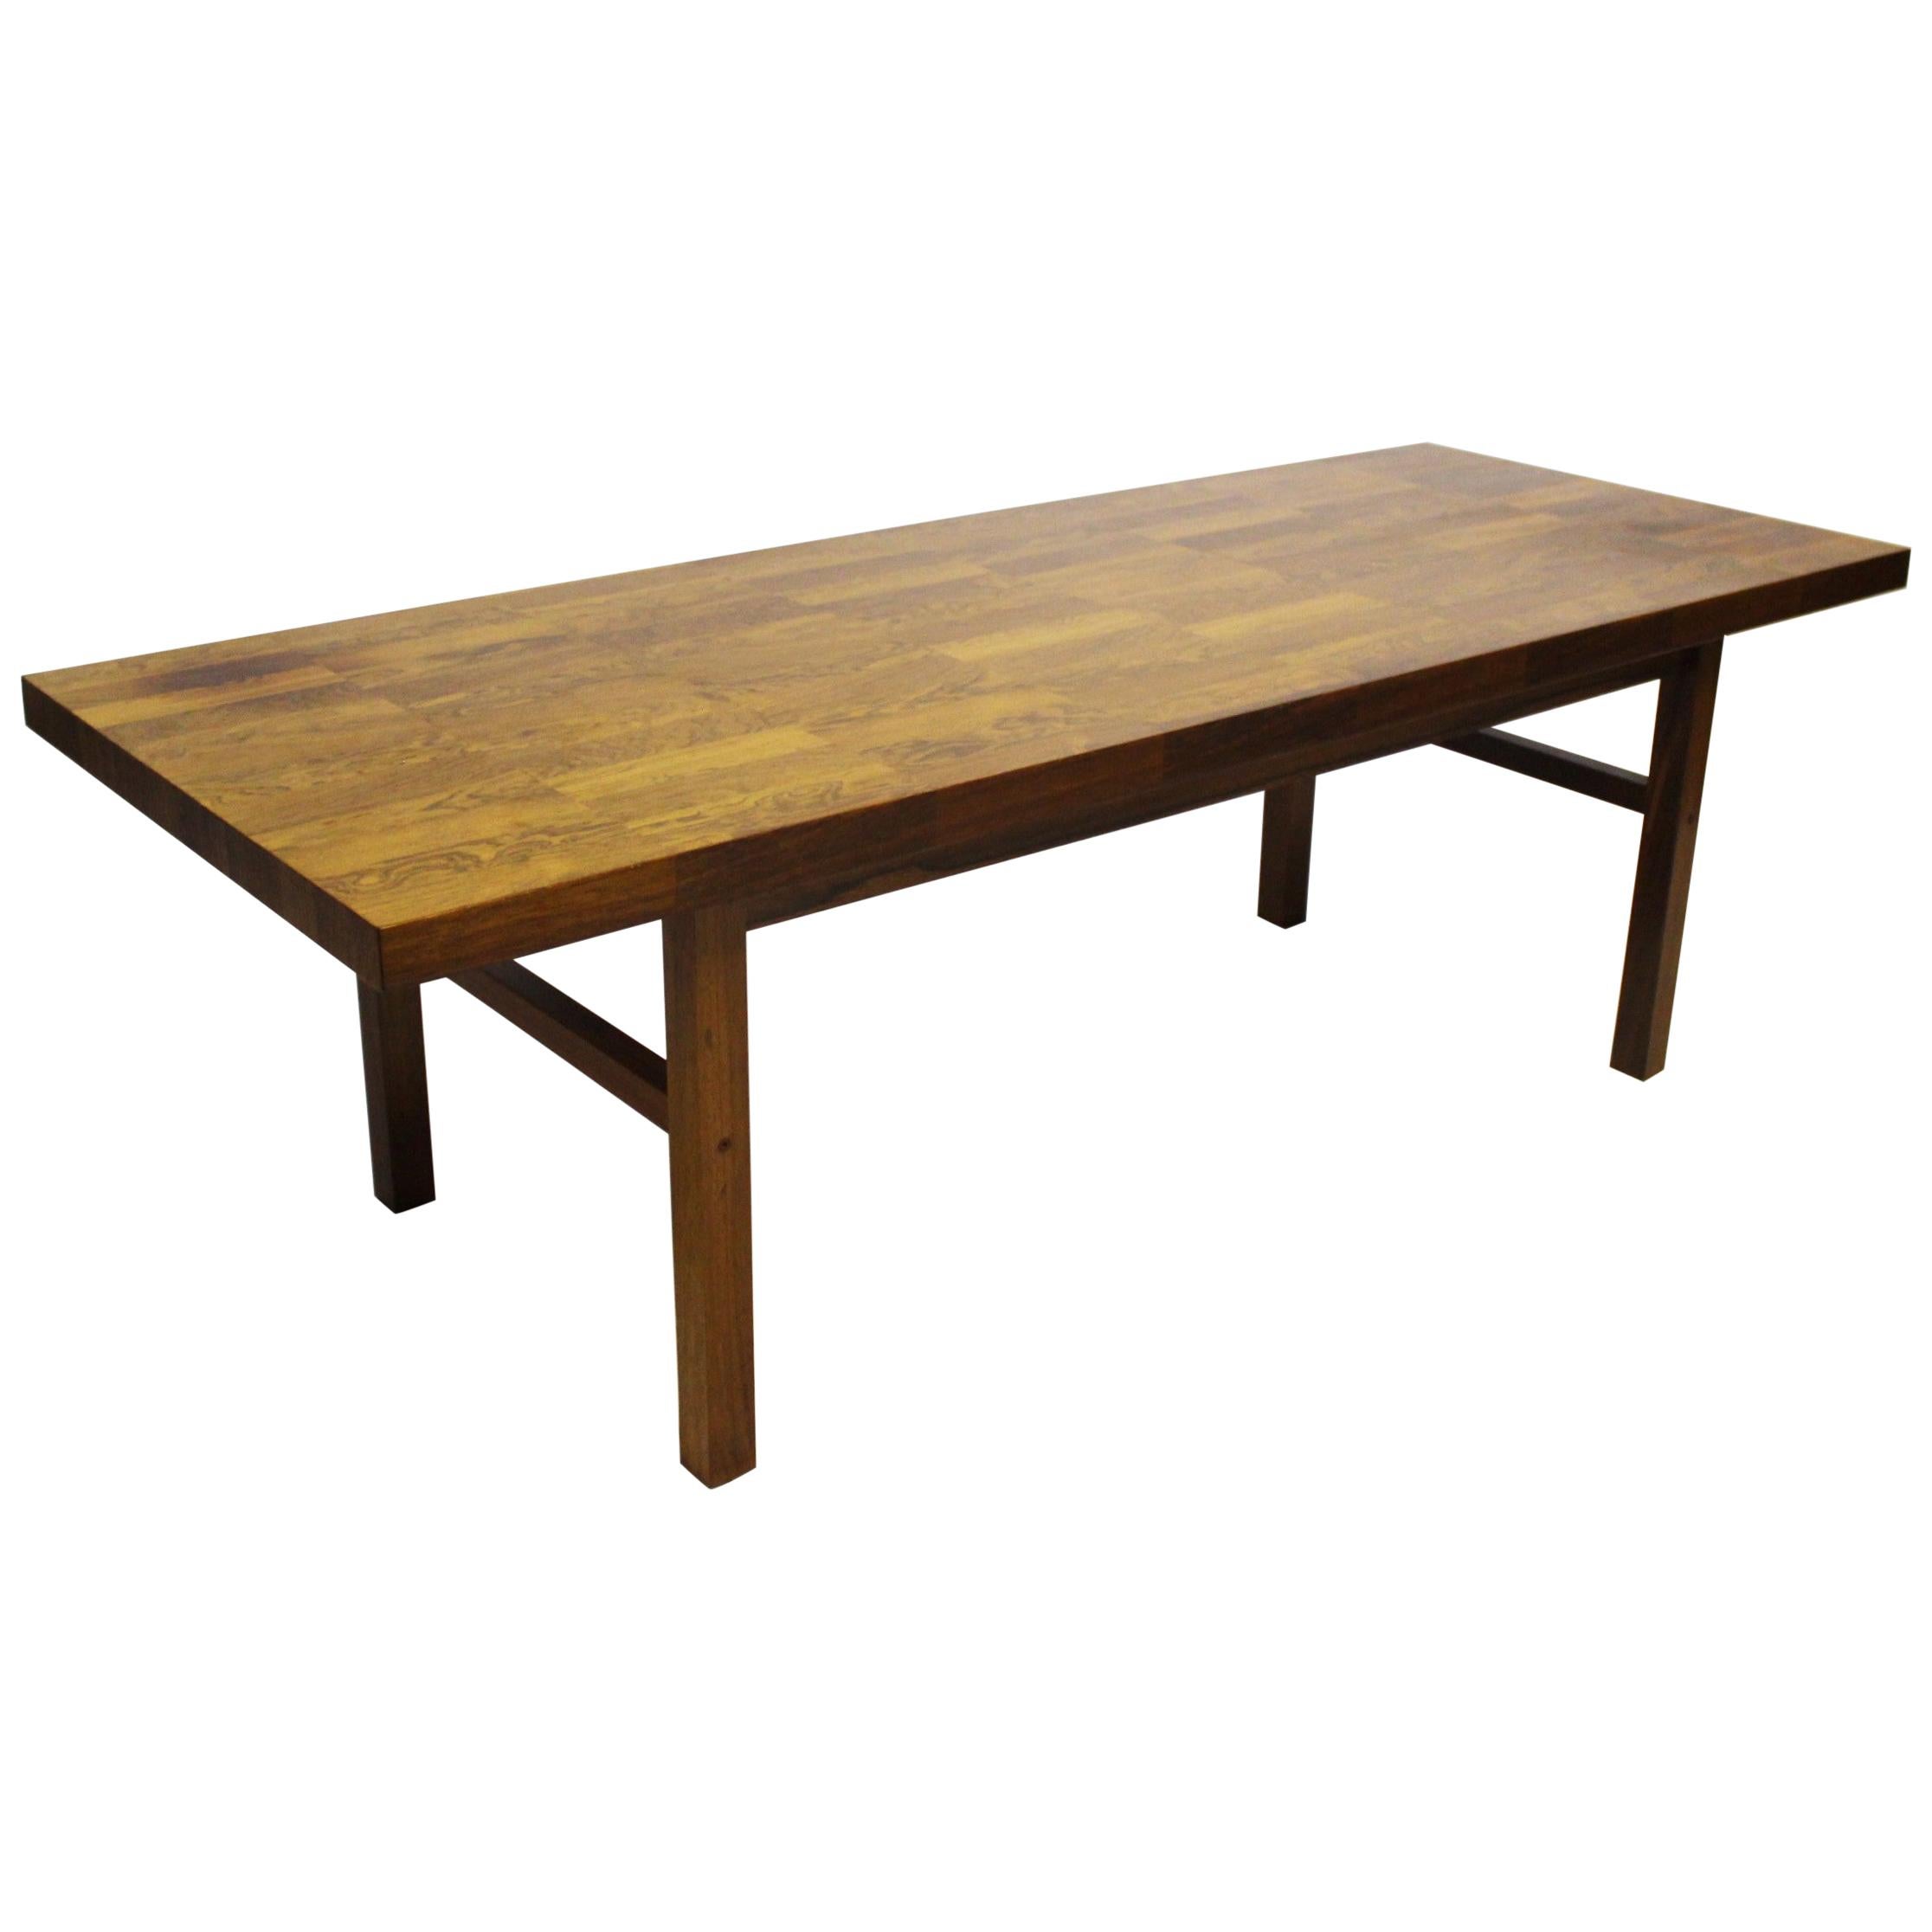 Coffee Table Made In Rosewood With Checkered Pattern, Danish Design From 1960s For Sale